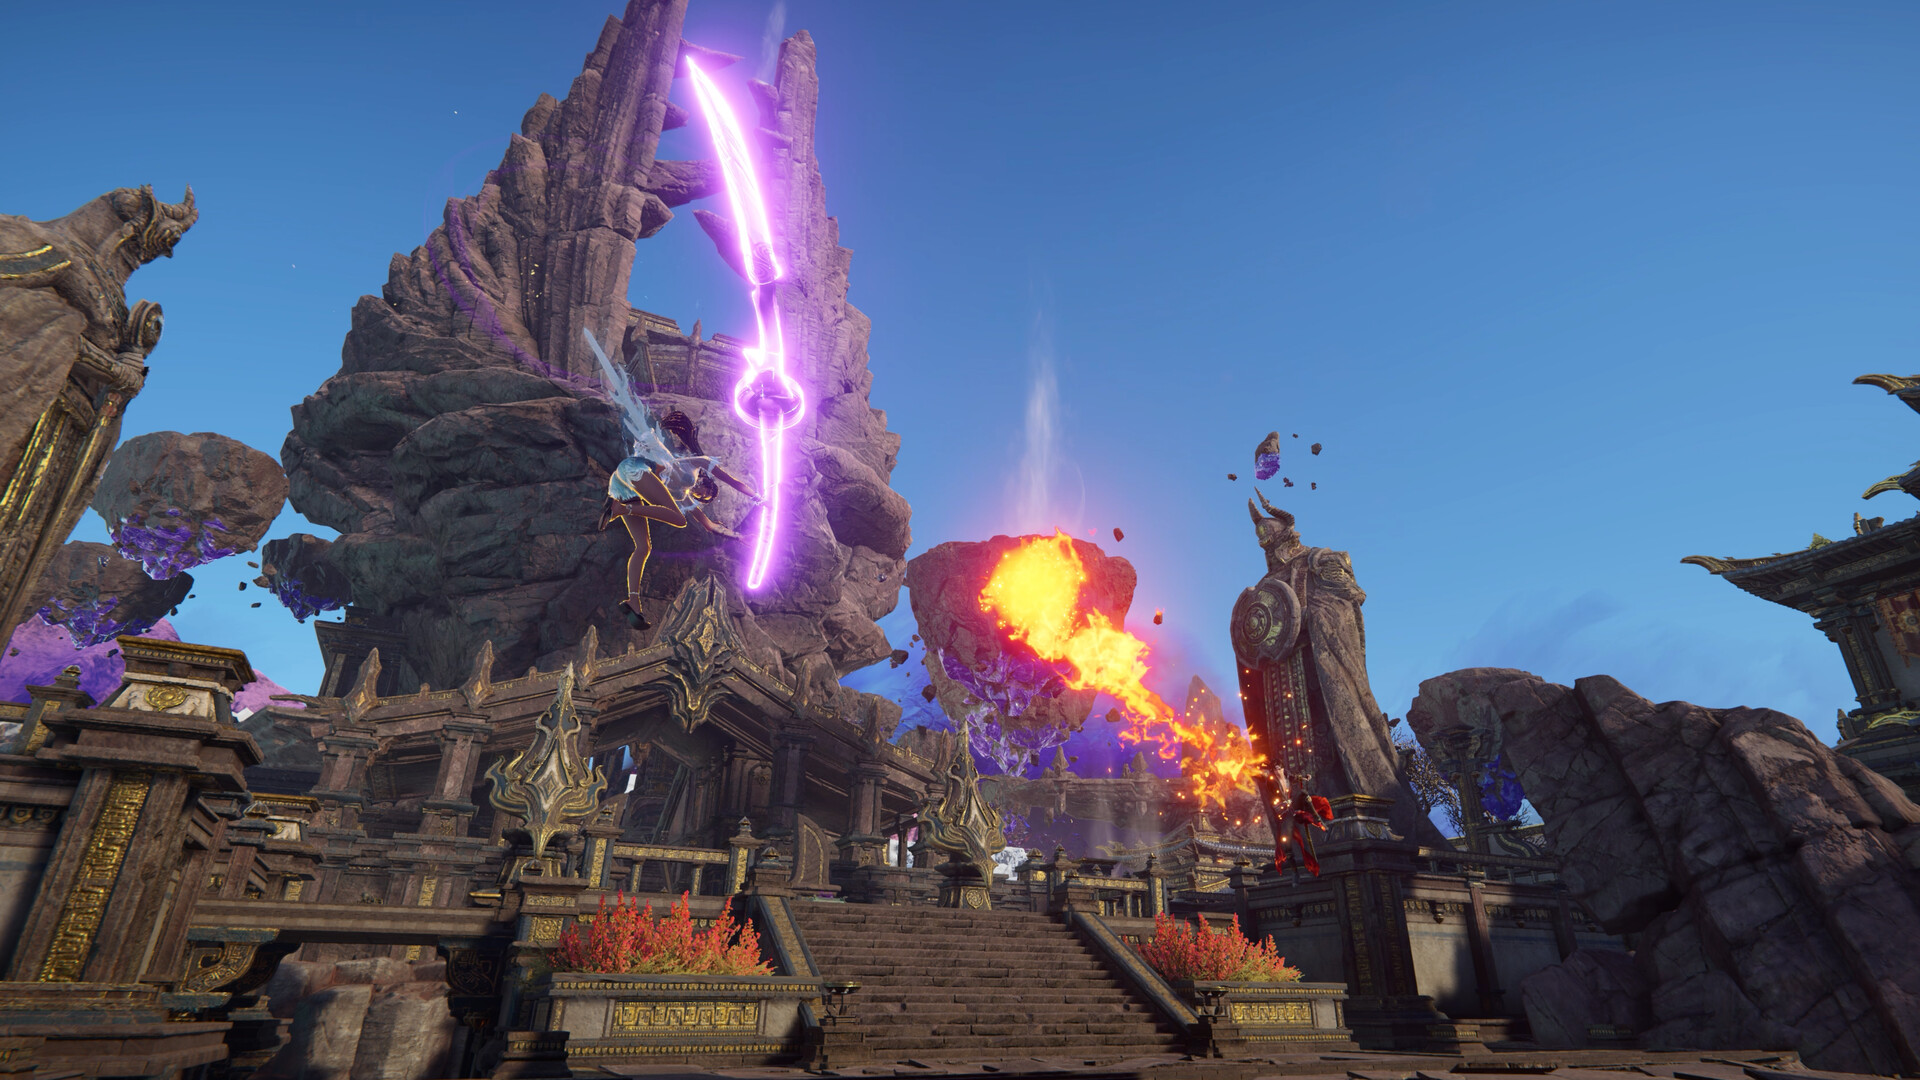 PC requirements and new screenshots for NARAKA: BLADEPOINT